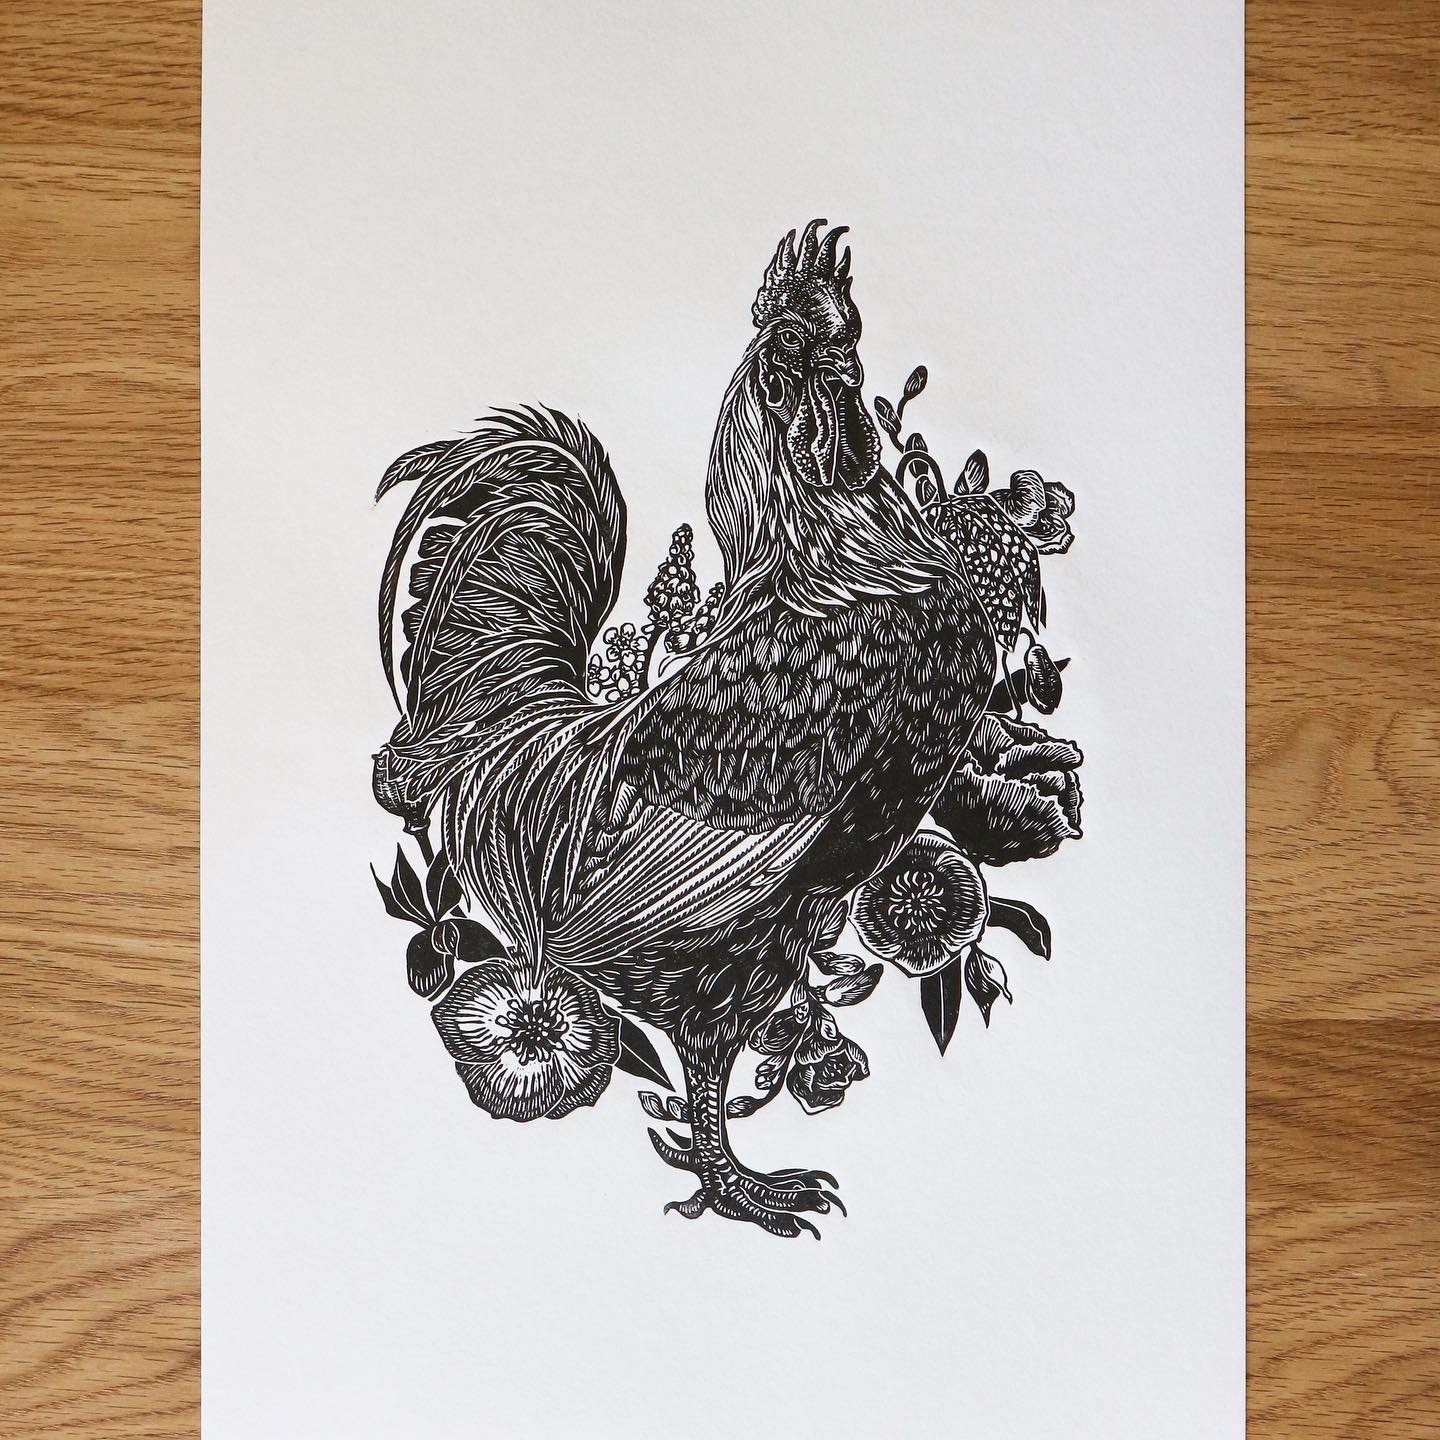 Black on white print of a rooster by artist and tutor Emily Robertson.